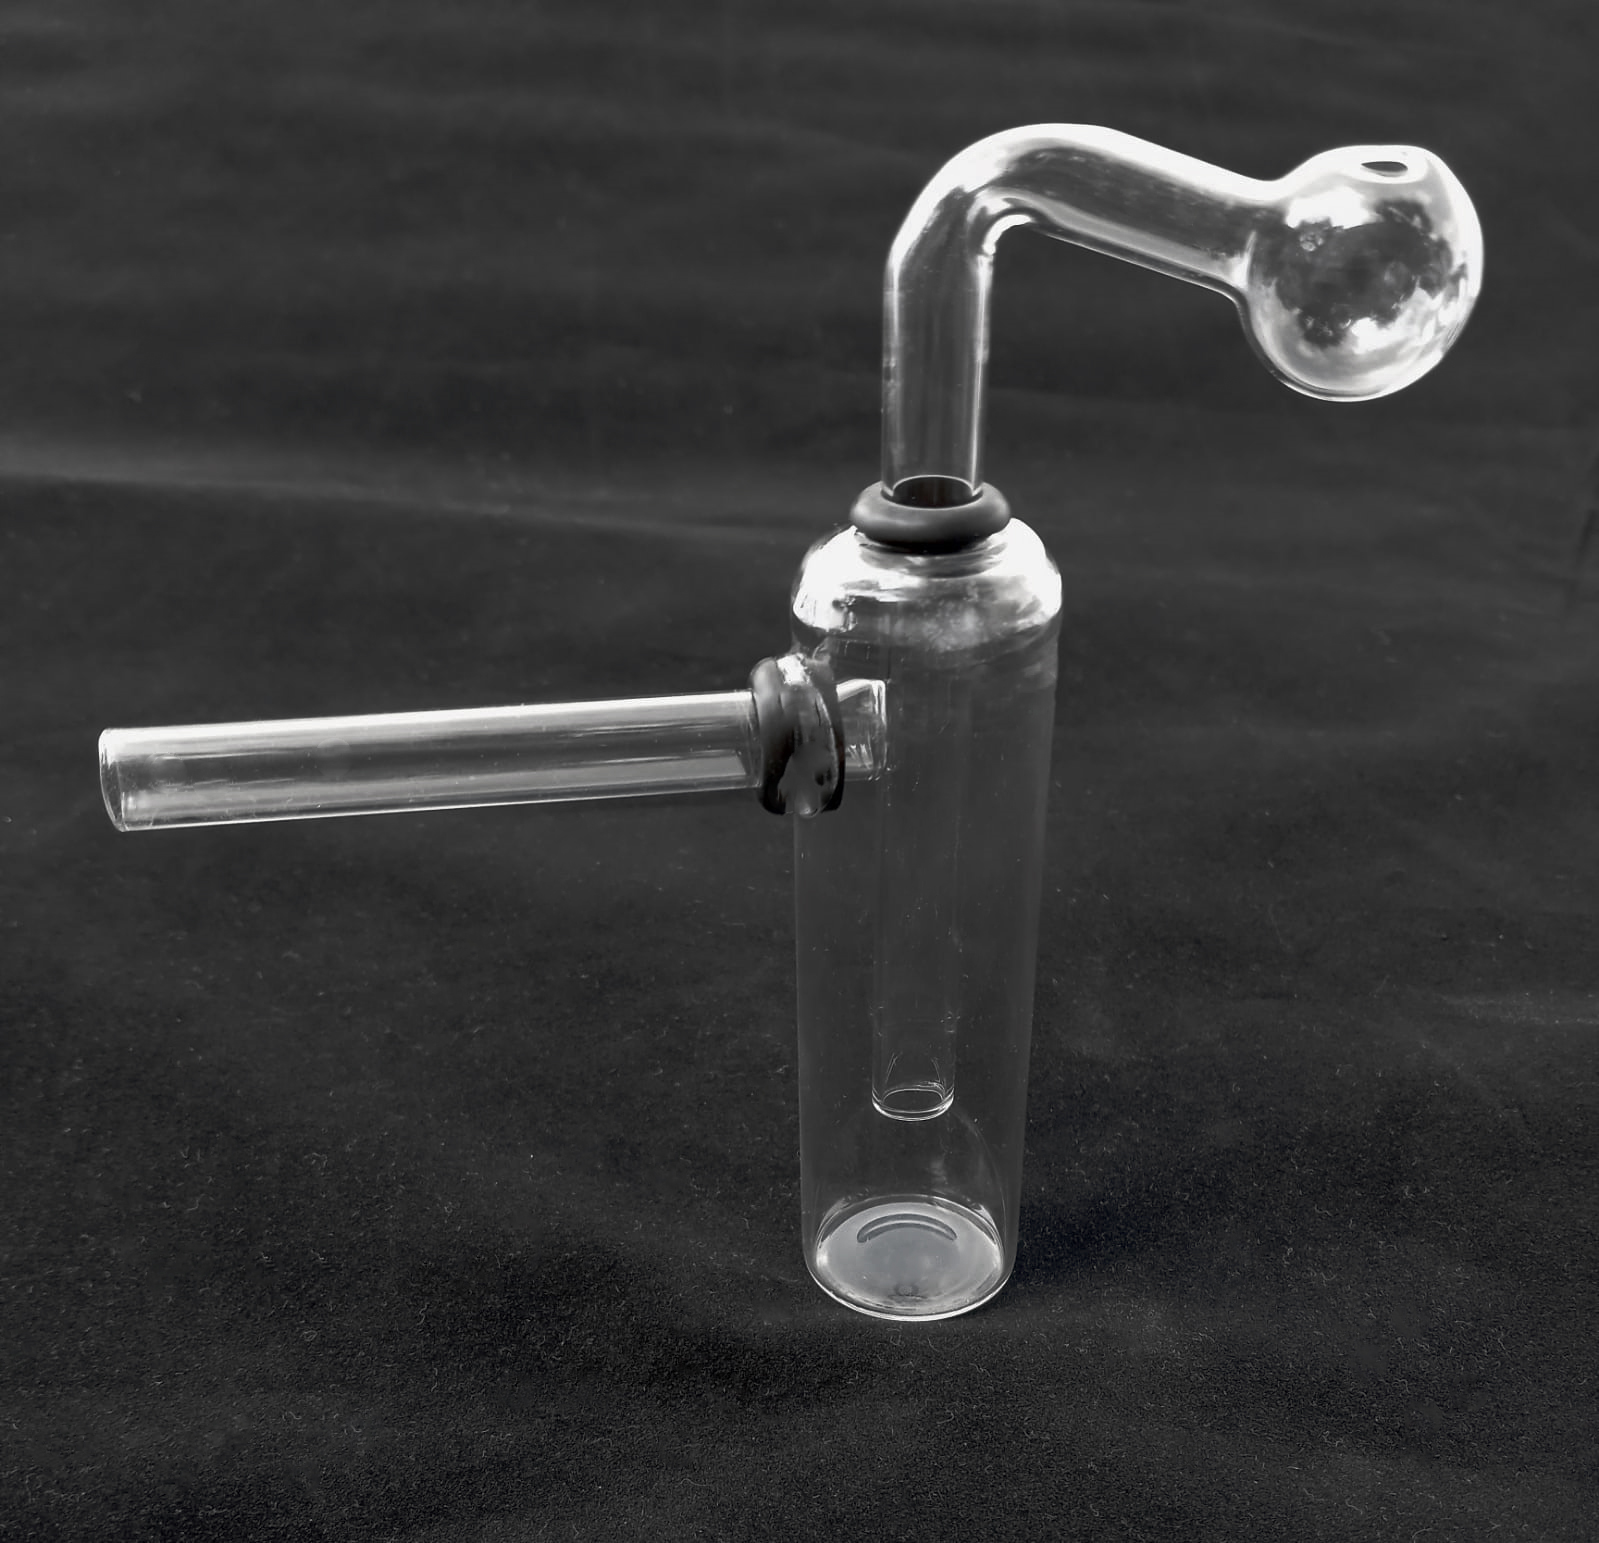 OB Bottle Water Pipe - 4 - IAI Corporation - Wholesale Glass Pipes &  Smoking Accessories